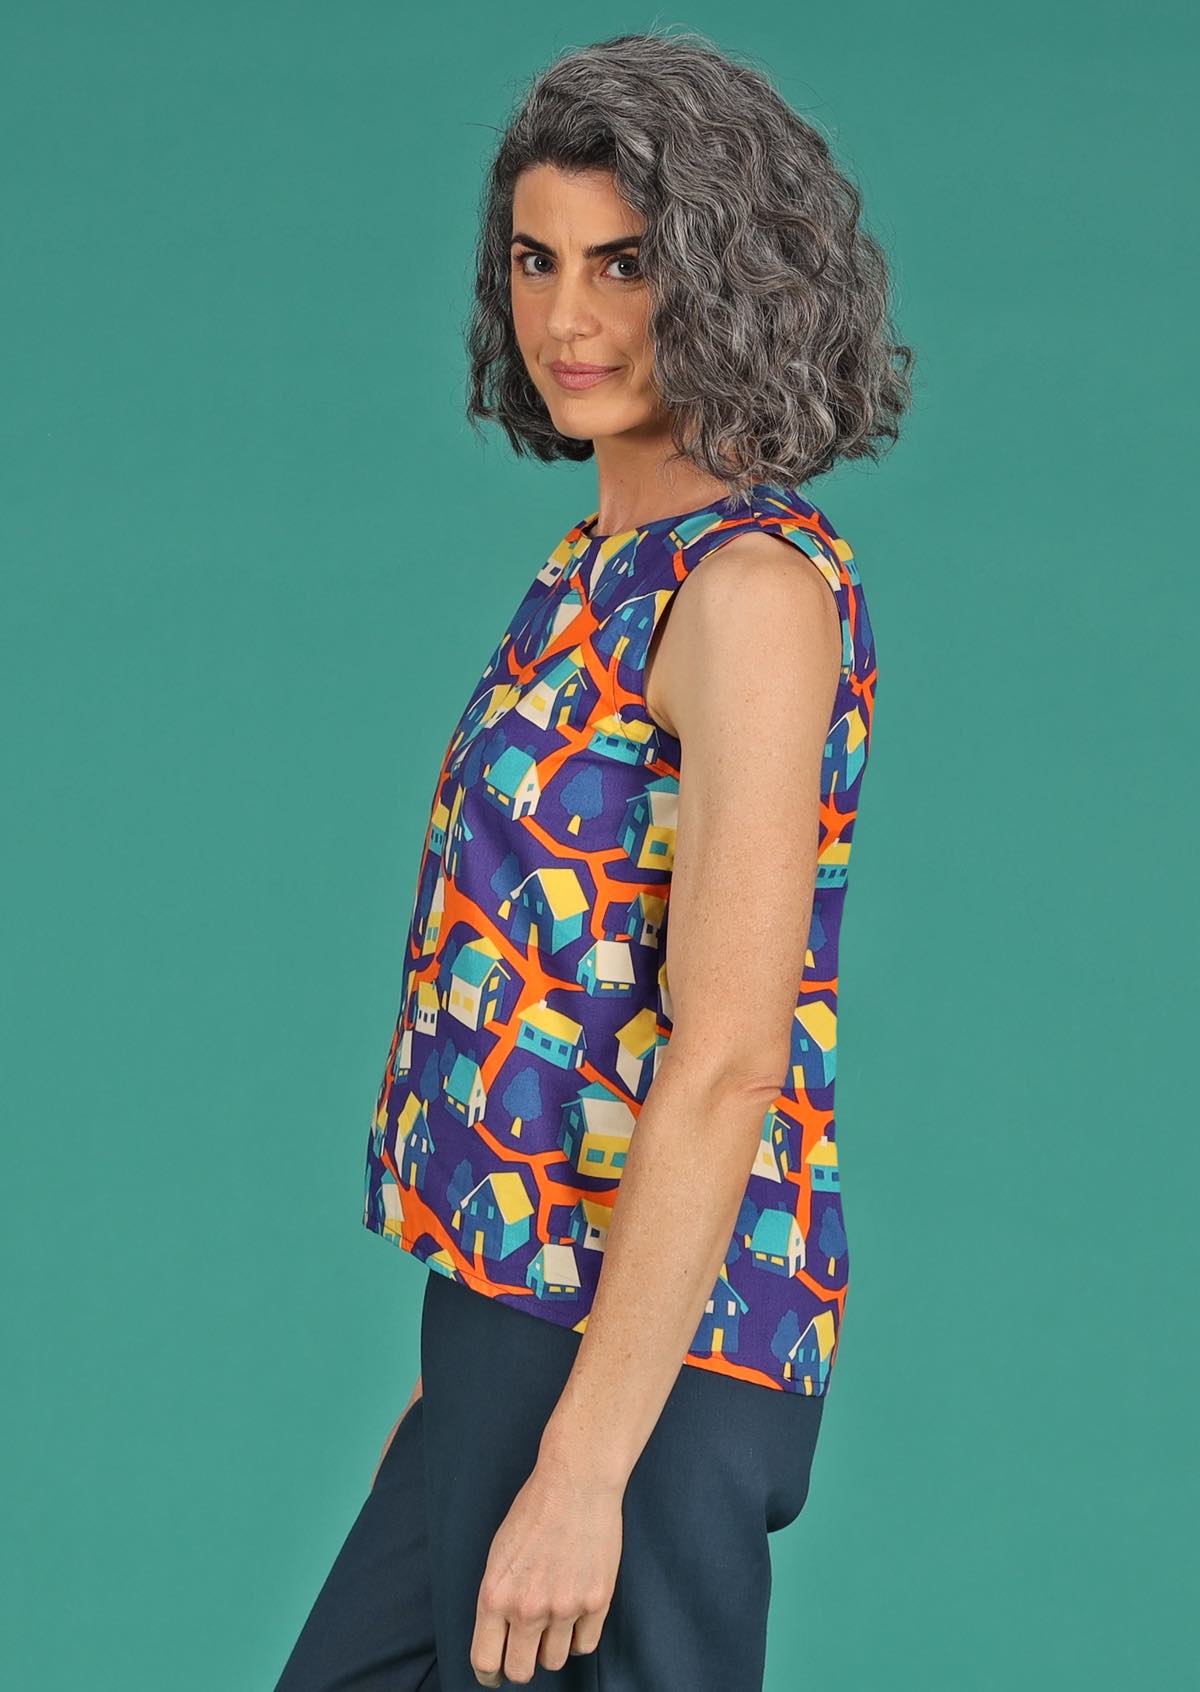 100% cotton colourful bold printed top